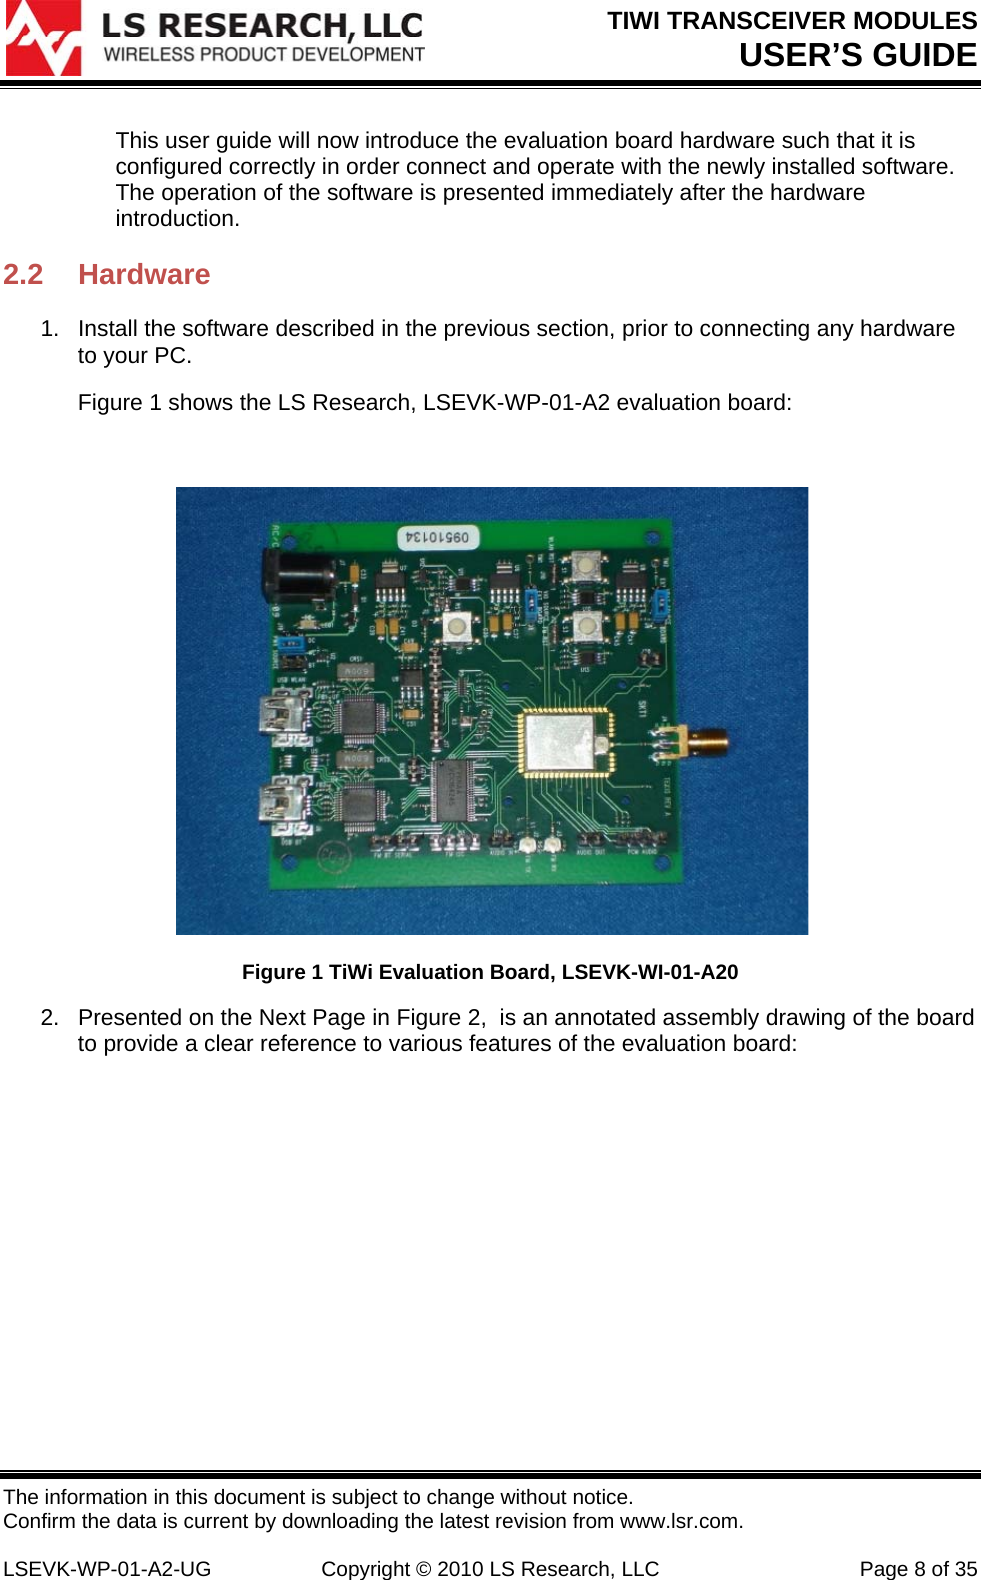 TIWI TRANSCEIVER MODULES USER’S GUIDE The information in this document is subject to change without notice. Confirm the data is current by downloading the latest revision from www.lsr.com.  LSEVK-WP-01-A2-UG  Copyright © 2010 LS Research, LLC  Page 8 of 35 This user guide will now introduce the evaluation board hardware such that it is configured correctly in order connect and operate with the newly installed software. The operation of the software is presented immediately after the hardware introduction. 2.2 Hardware 1.  Install the software described in the previous section, prior to connecting any hardware to your PC. Figure 1 shows the LS Research, LSEVK-WP-01-A2 evaluation board:    Figure 1 TiWi Evaluation Board, LSEVK-WI-01-A20 2.  Presented on the Next Page in Figure 2,  is an annotated assembly drawing of the board to provide a clear reference to various features of the evaluation board:         